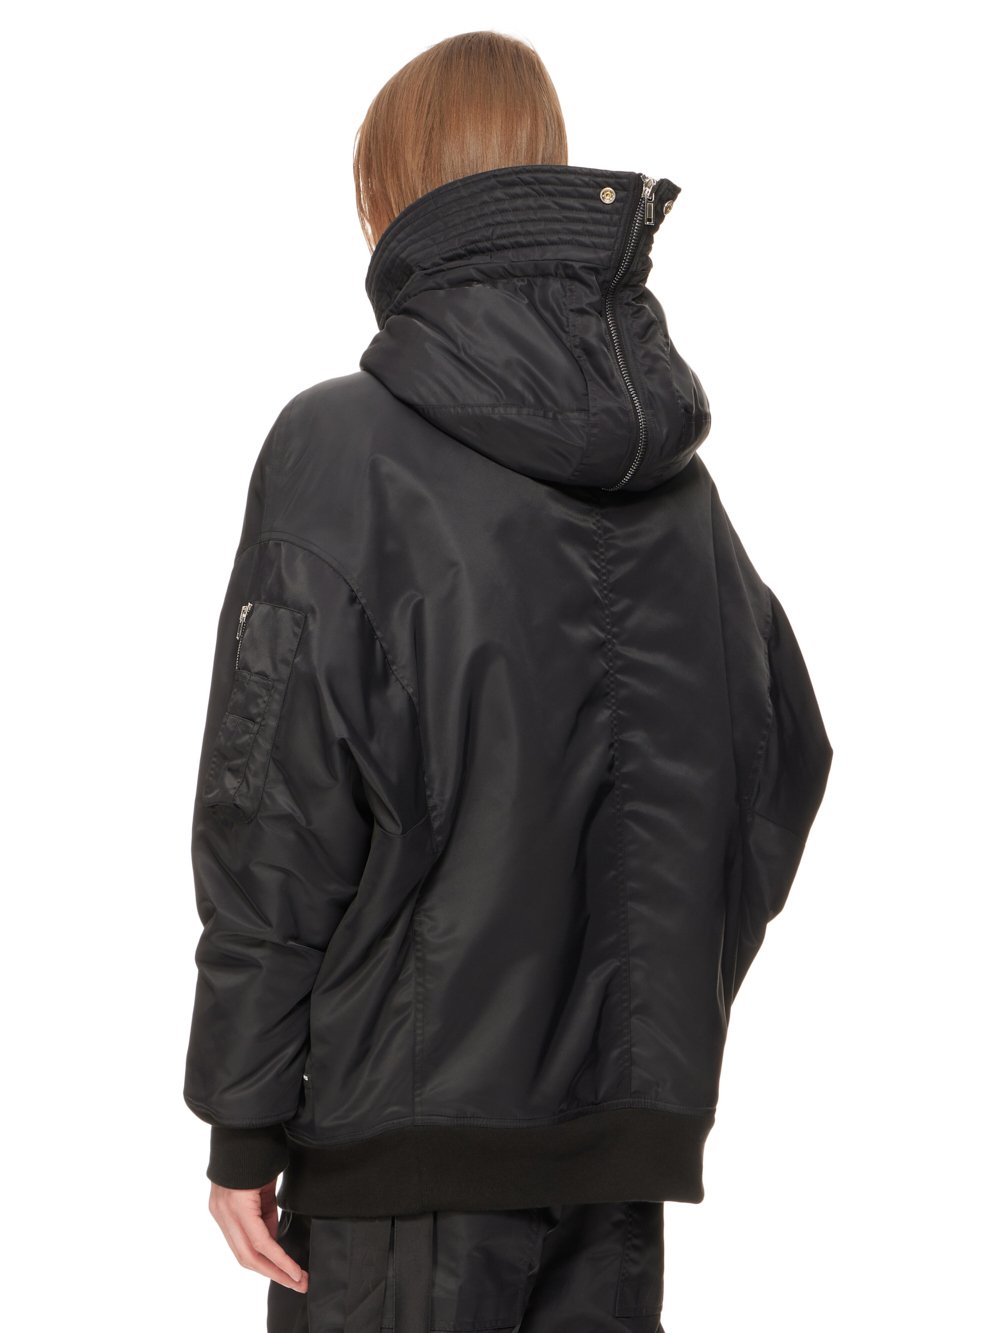 DRKSHDW FW23 LUXOR HOODED BOMBER IN BLACK AND MAUVE RECYCLED BOMBER